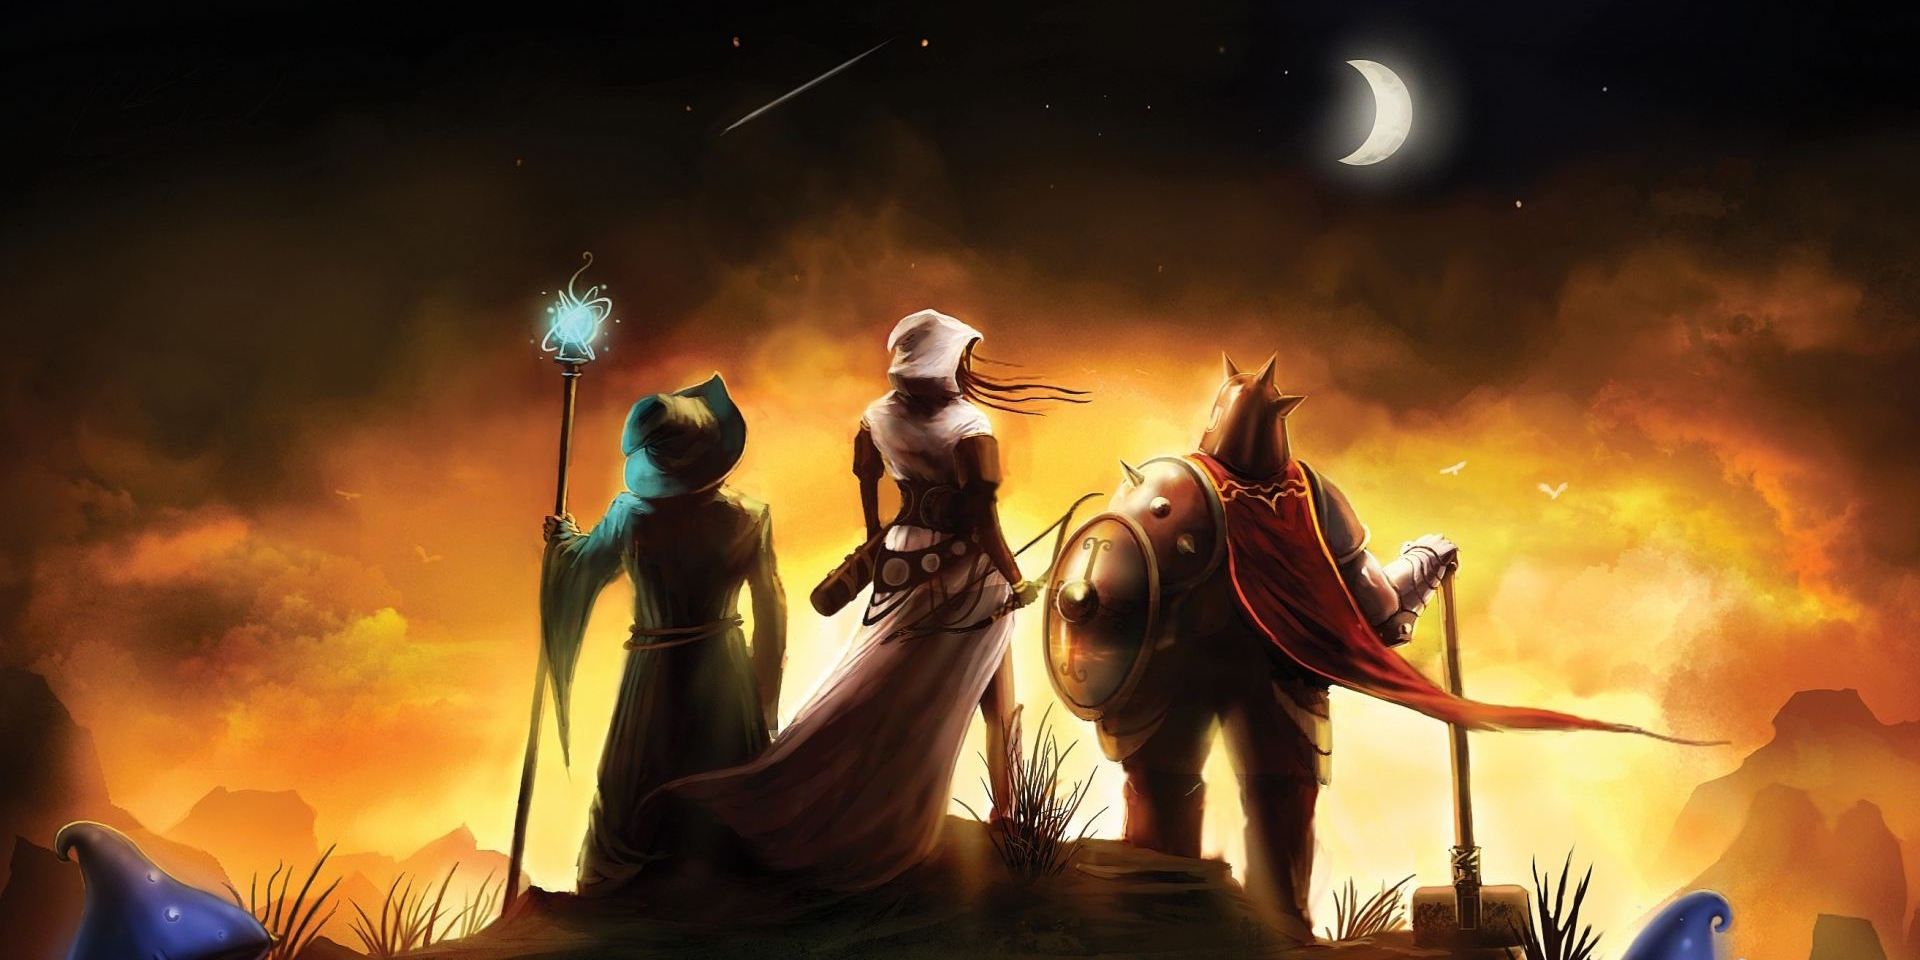 The heroes of Trine in an artsy image